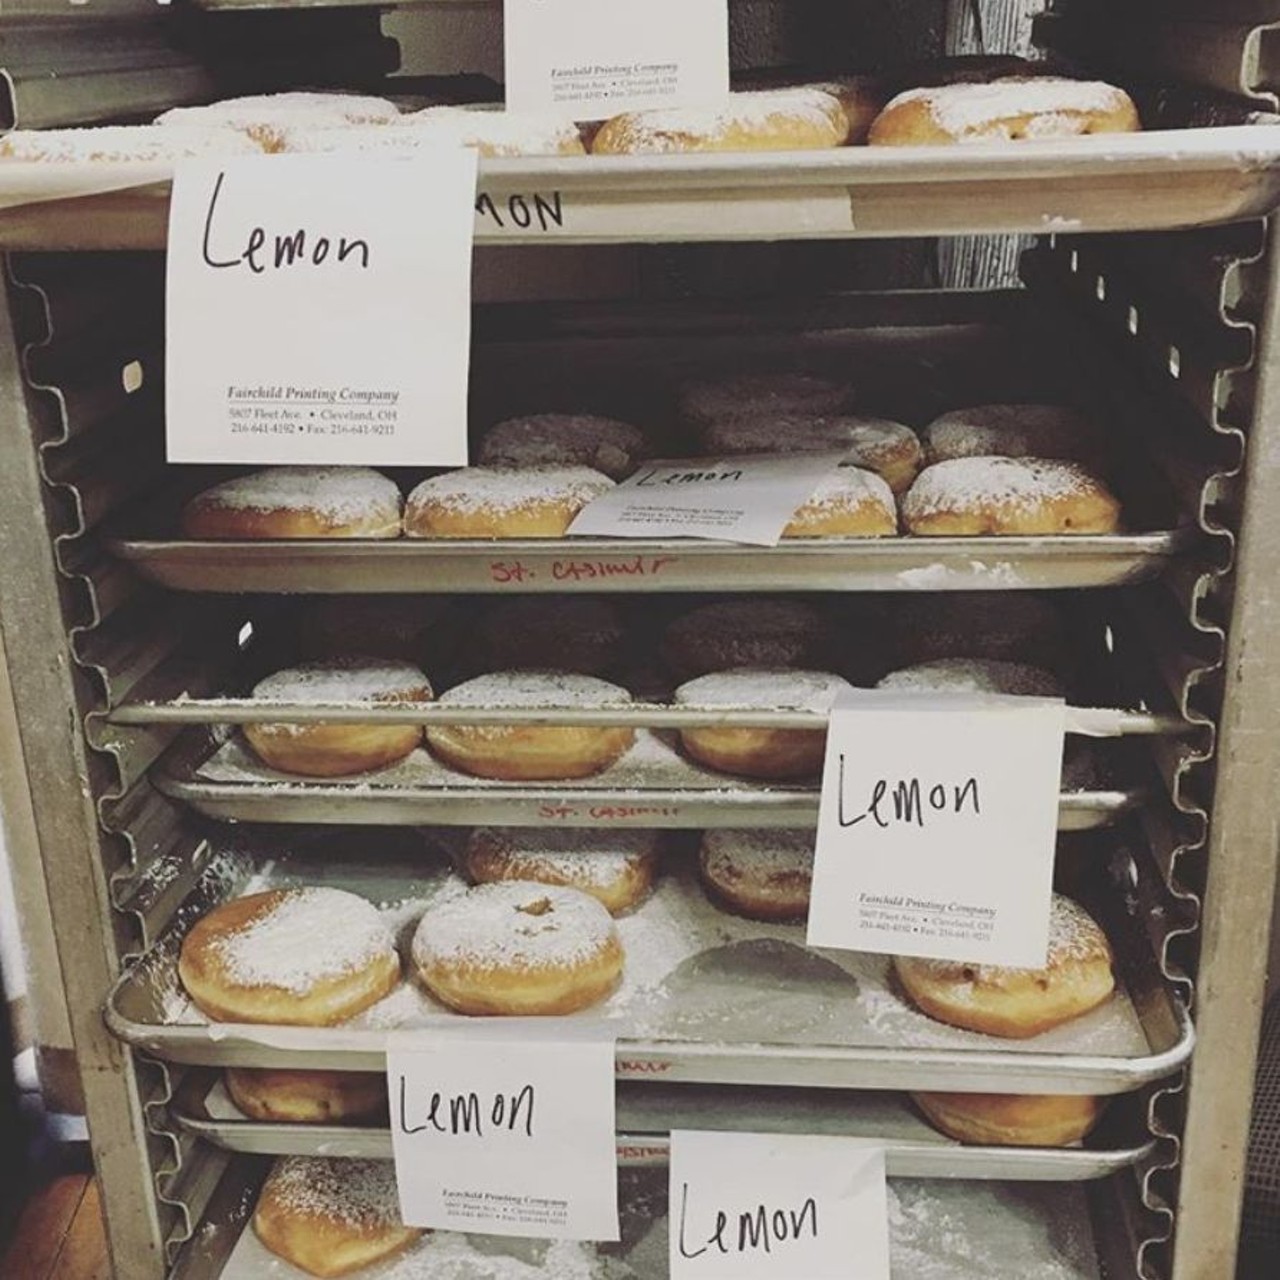  Seven Roses
6301 Fleet Ave, 216-641-5789
Seven Roses, located in Slavic Village, has been dishing out Old World cuisine for more than a decade. Time your visit right and you might be able to score one of their famous paczkis.  
Photo via  heritagewitch/Instagram